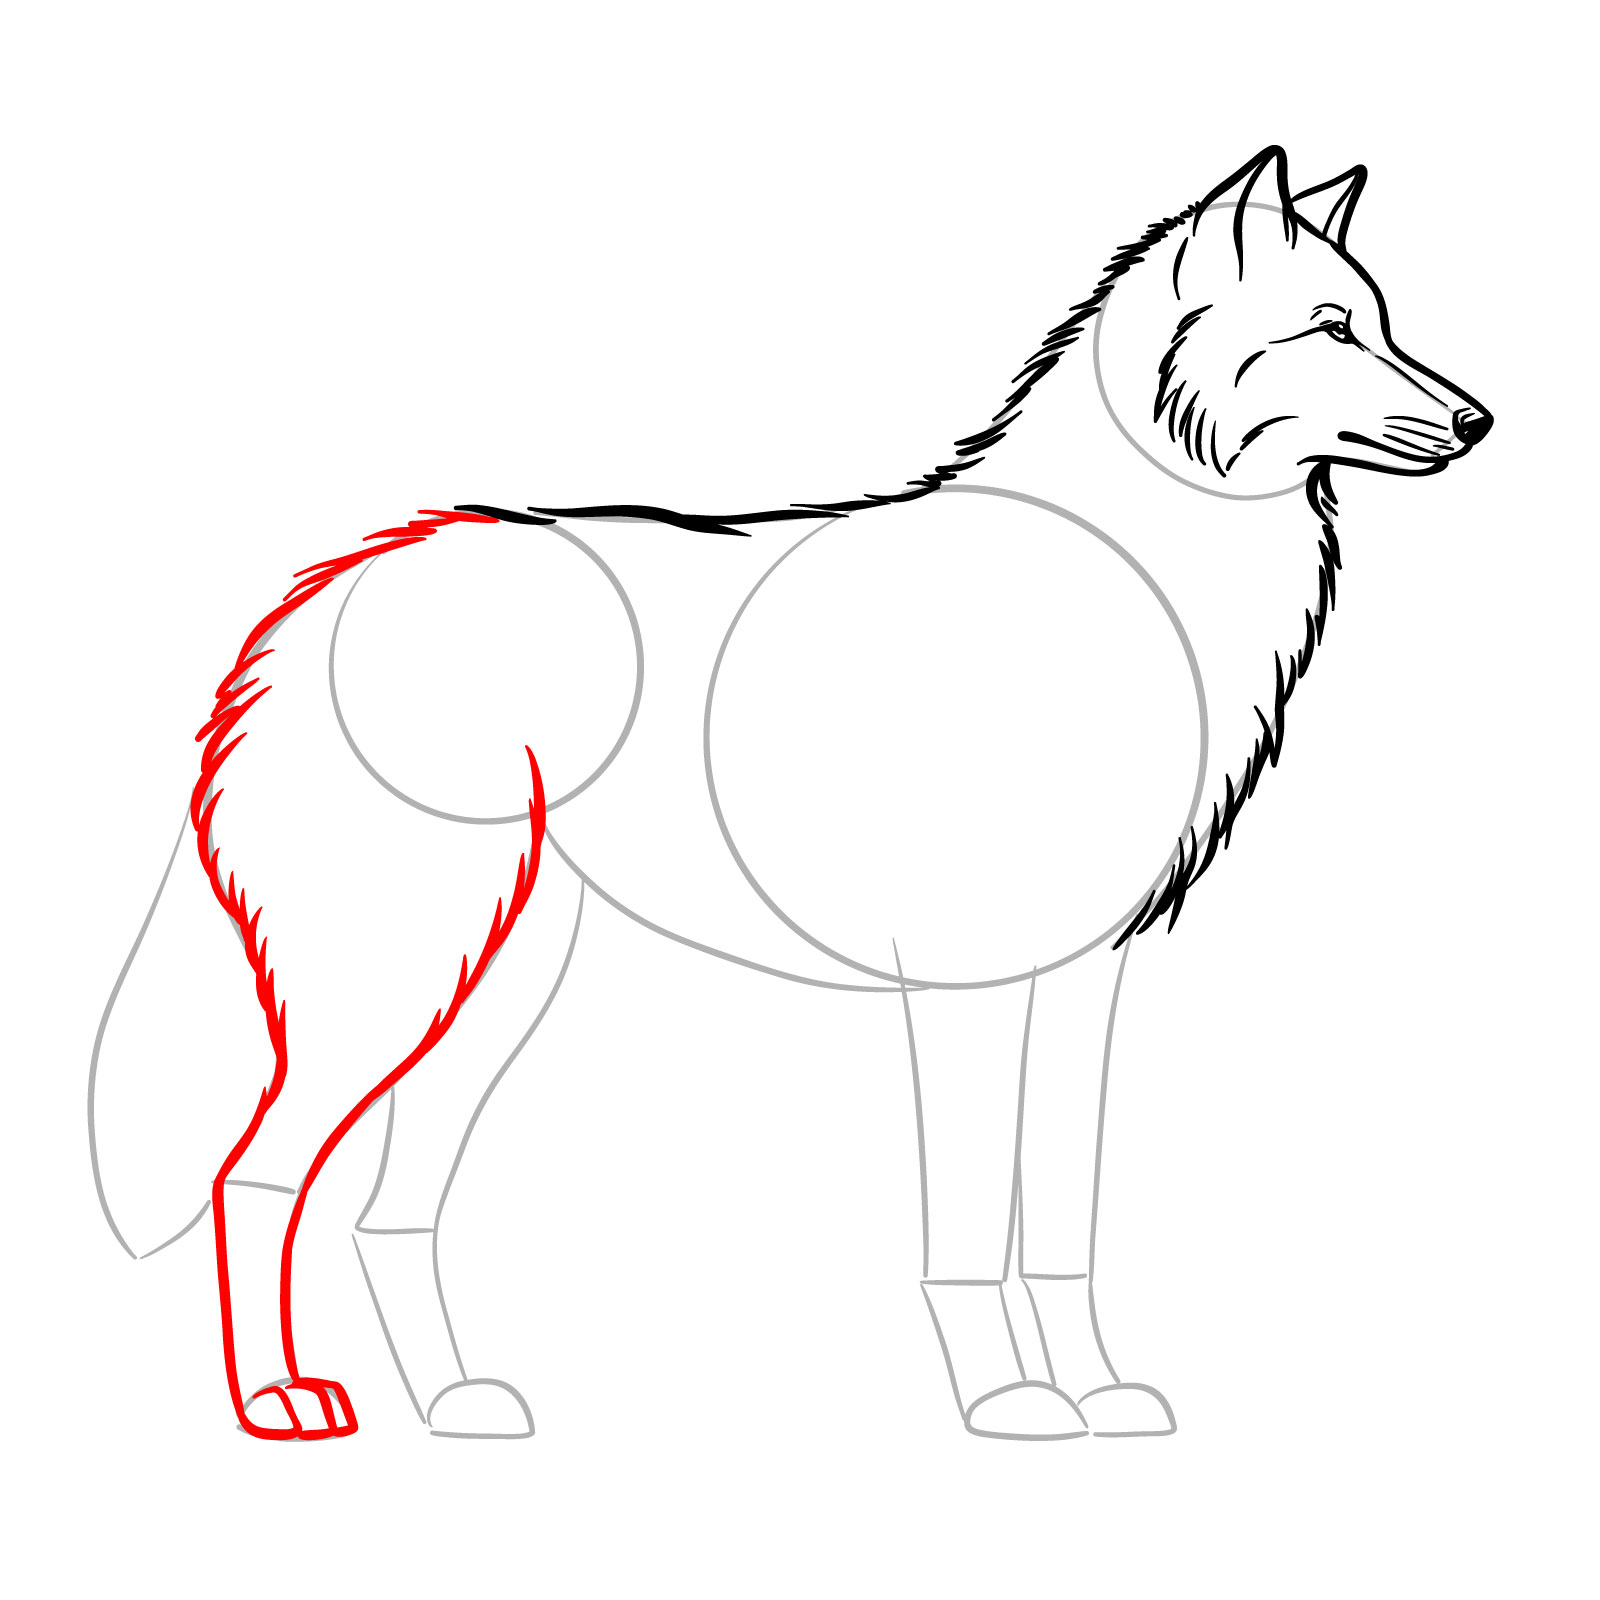 Illustrating the rear leg of a wolf in a side view drawing guide - step 09